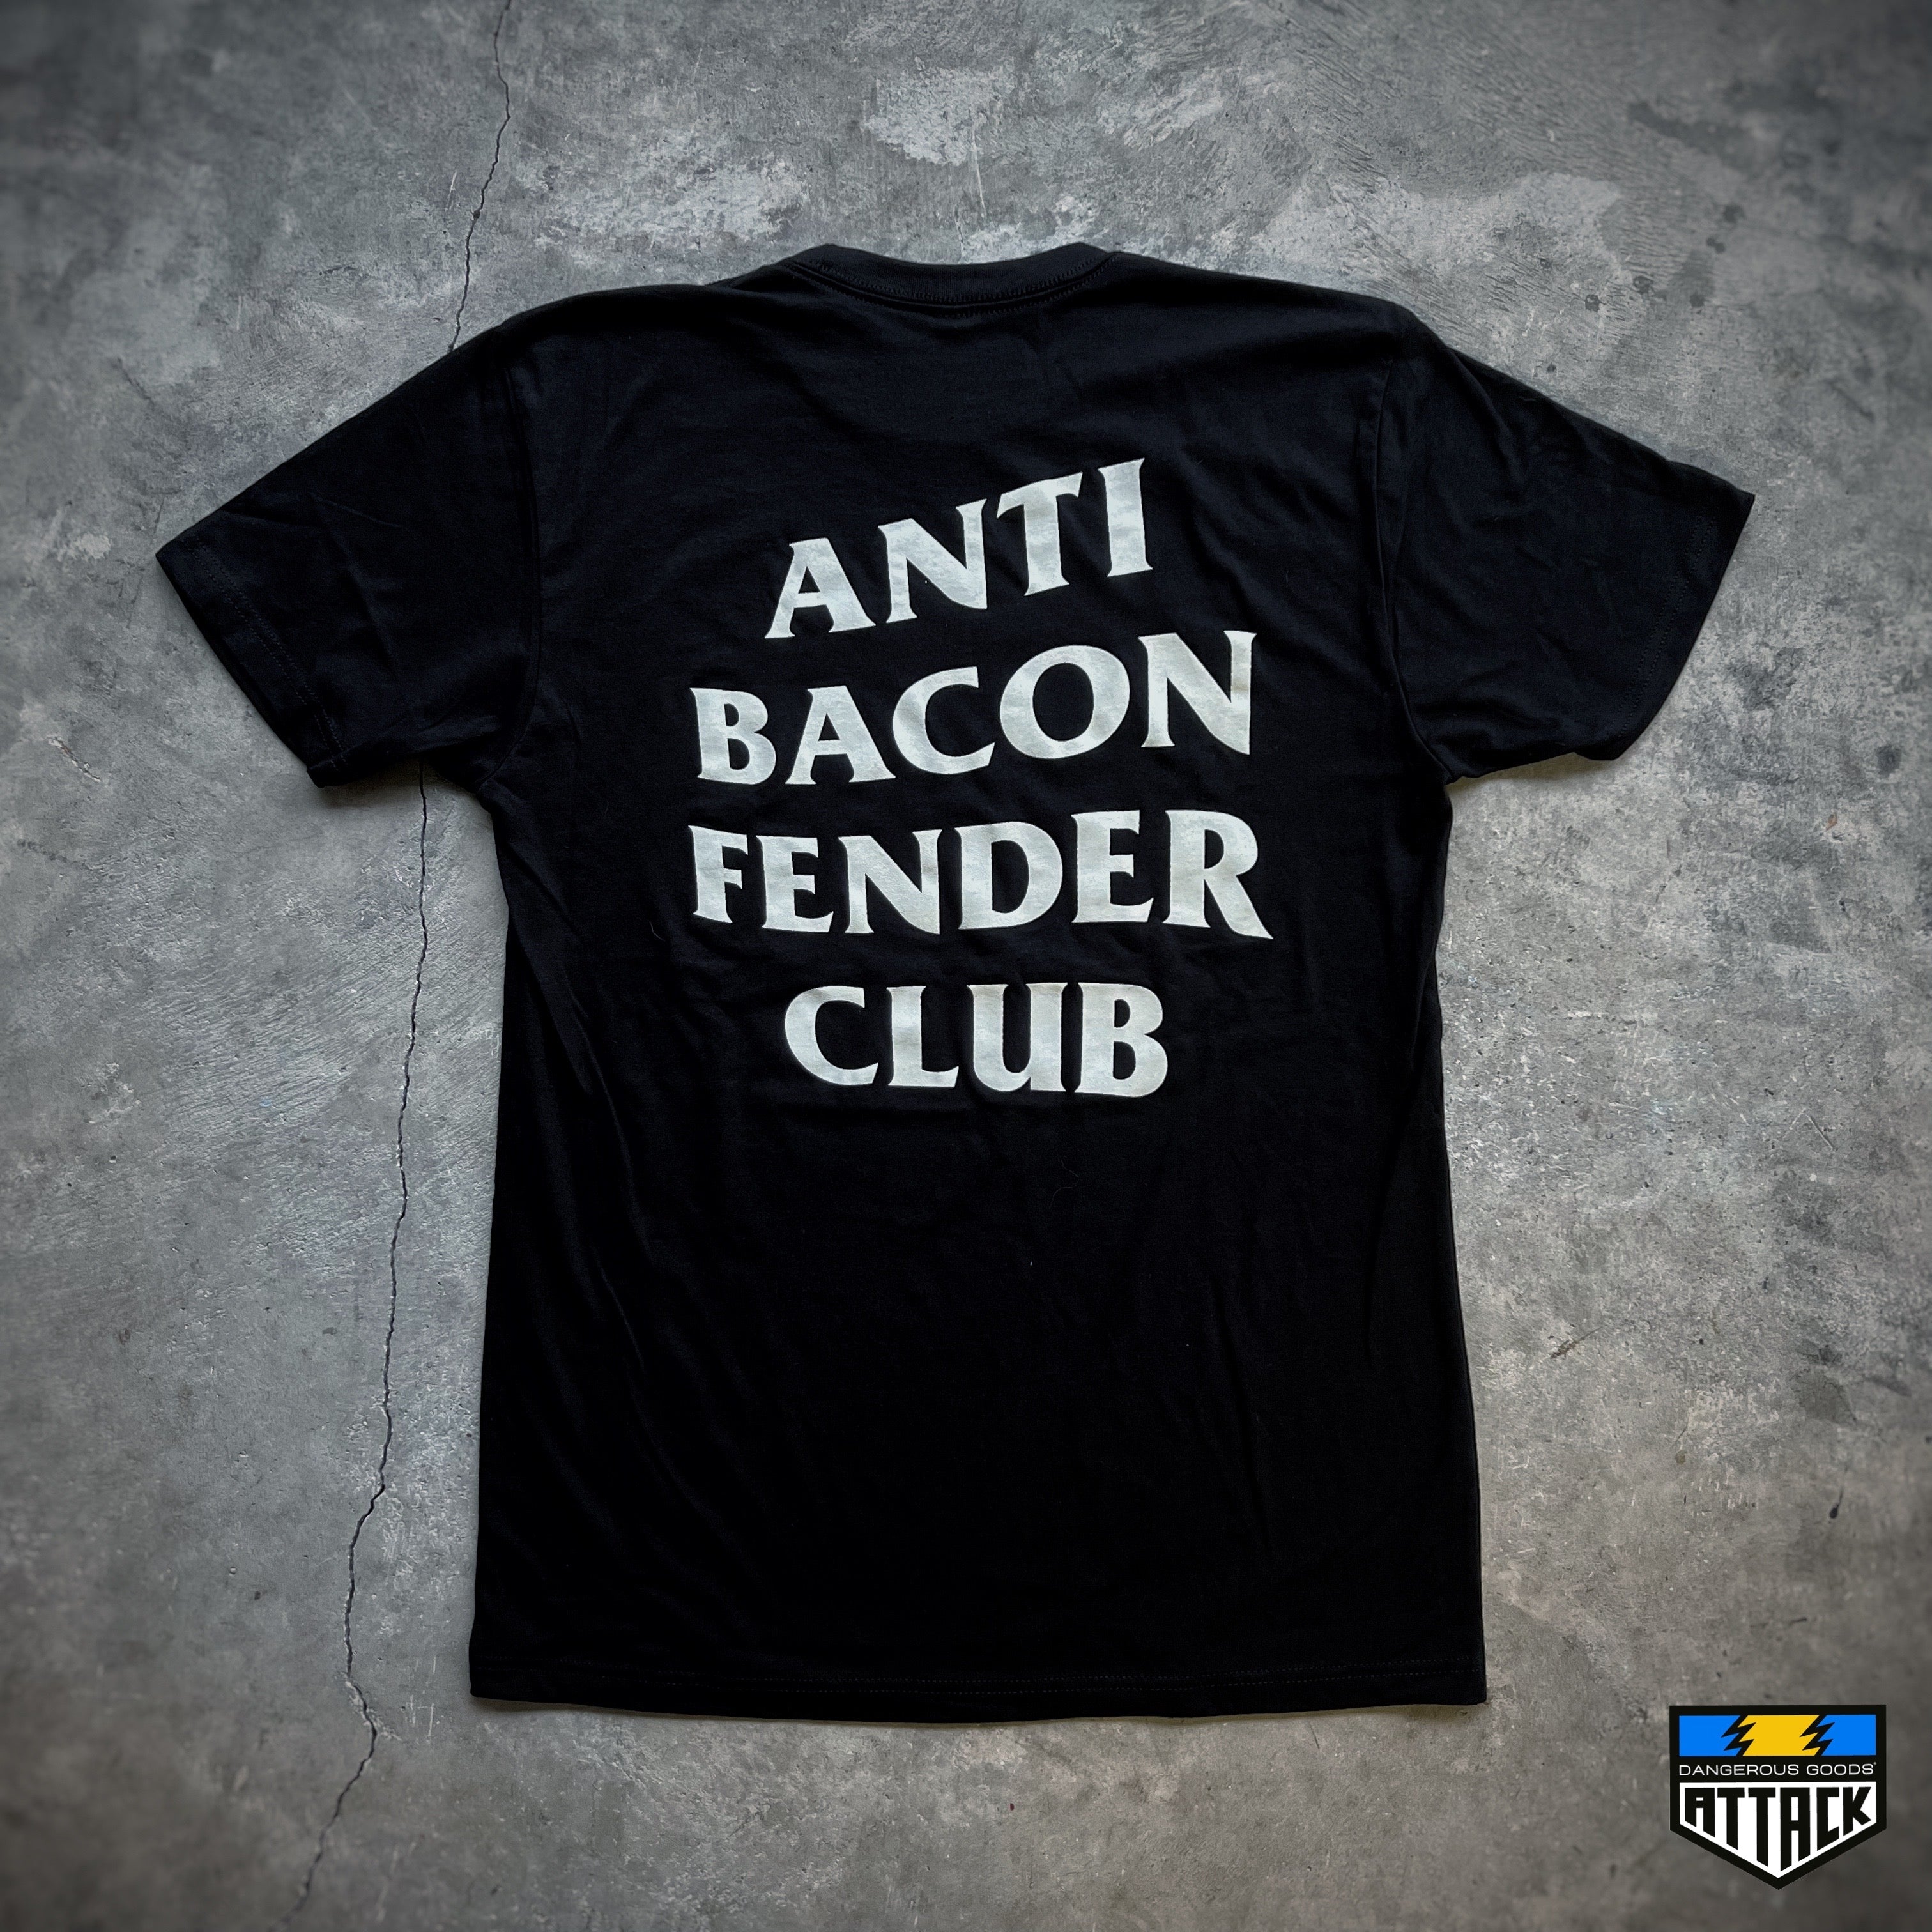 Back view of black Tshirt with white curved font that reads Anti bacon fender club 